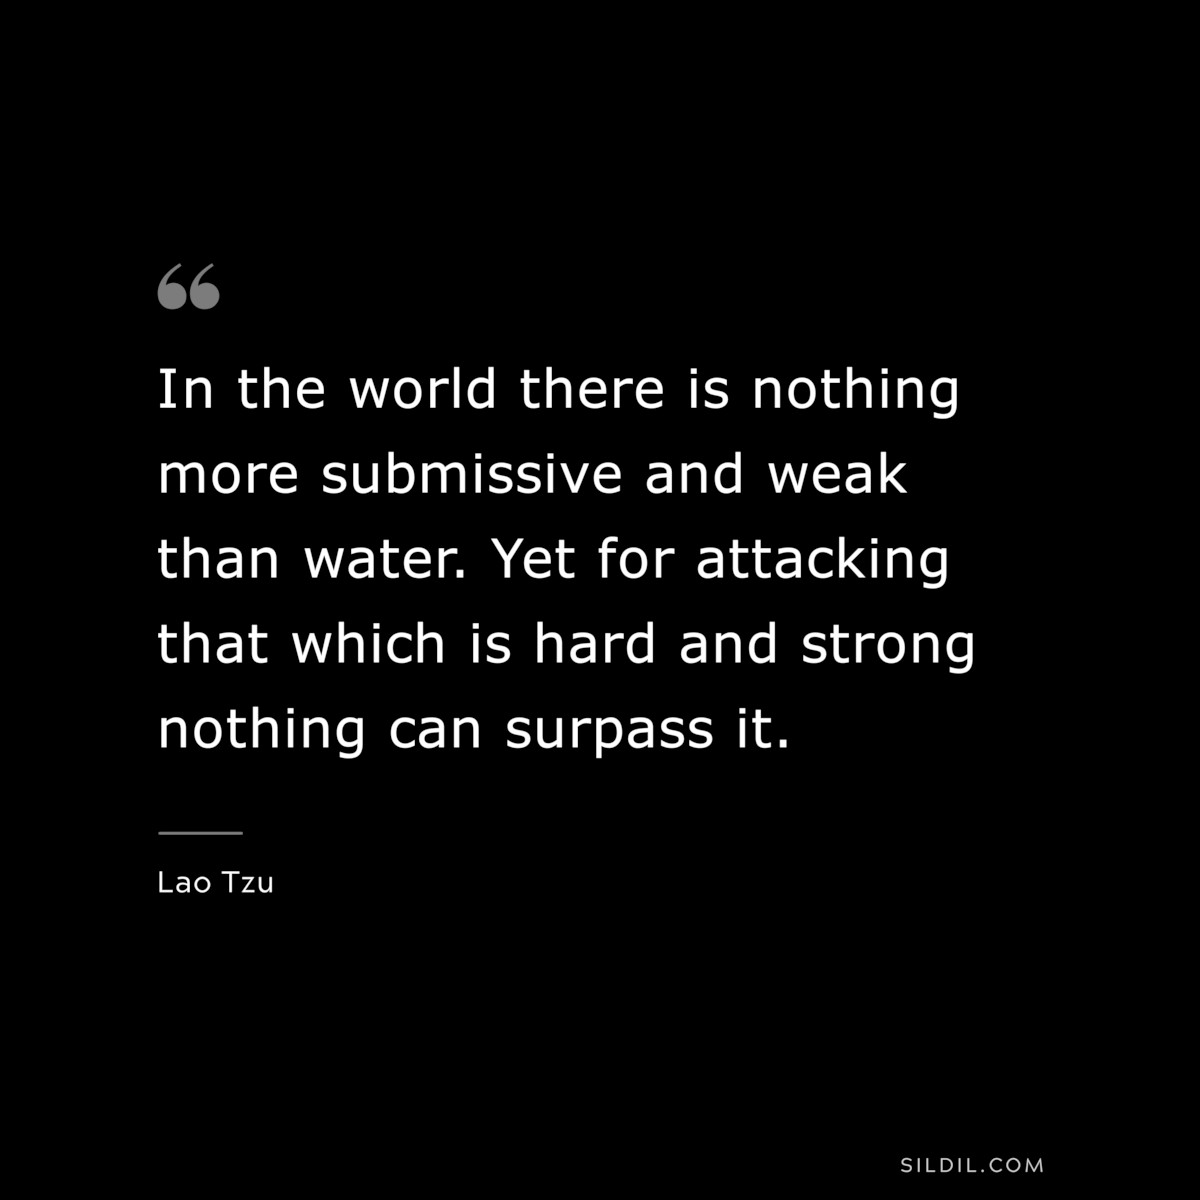 In the world there is nothing more submissive and weak than water. Yet for attacking that which is hard and strong nothing can surpass it. ― Lao Tzu